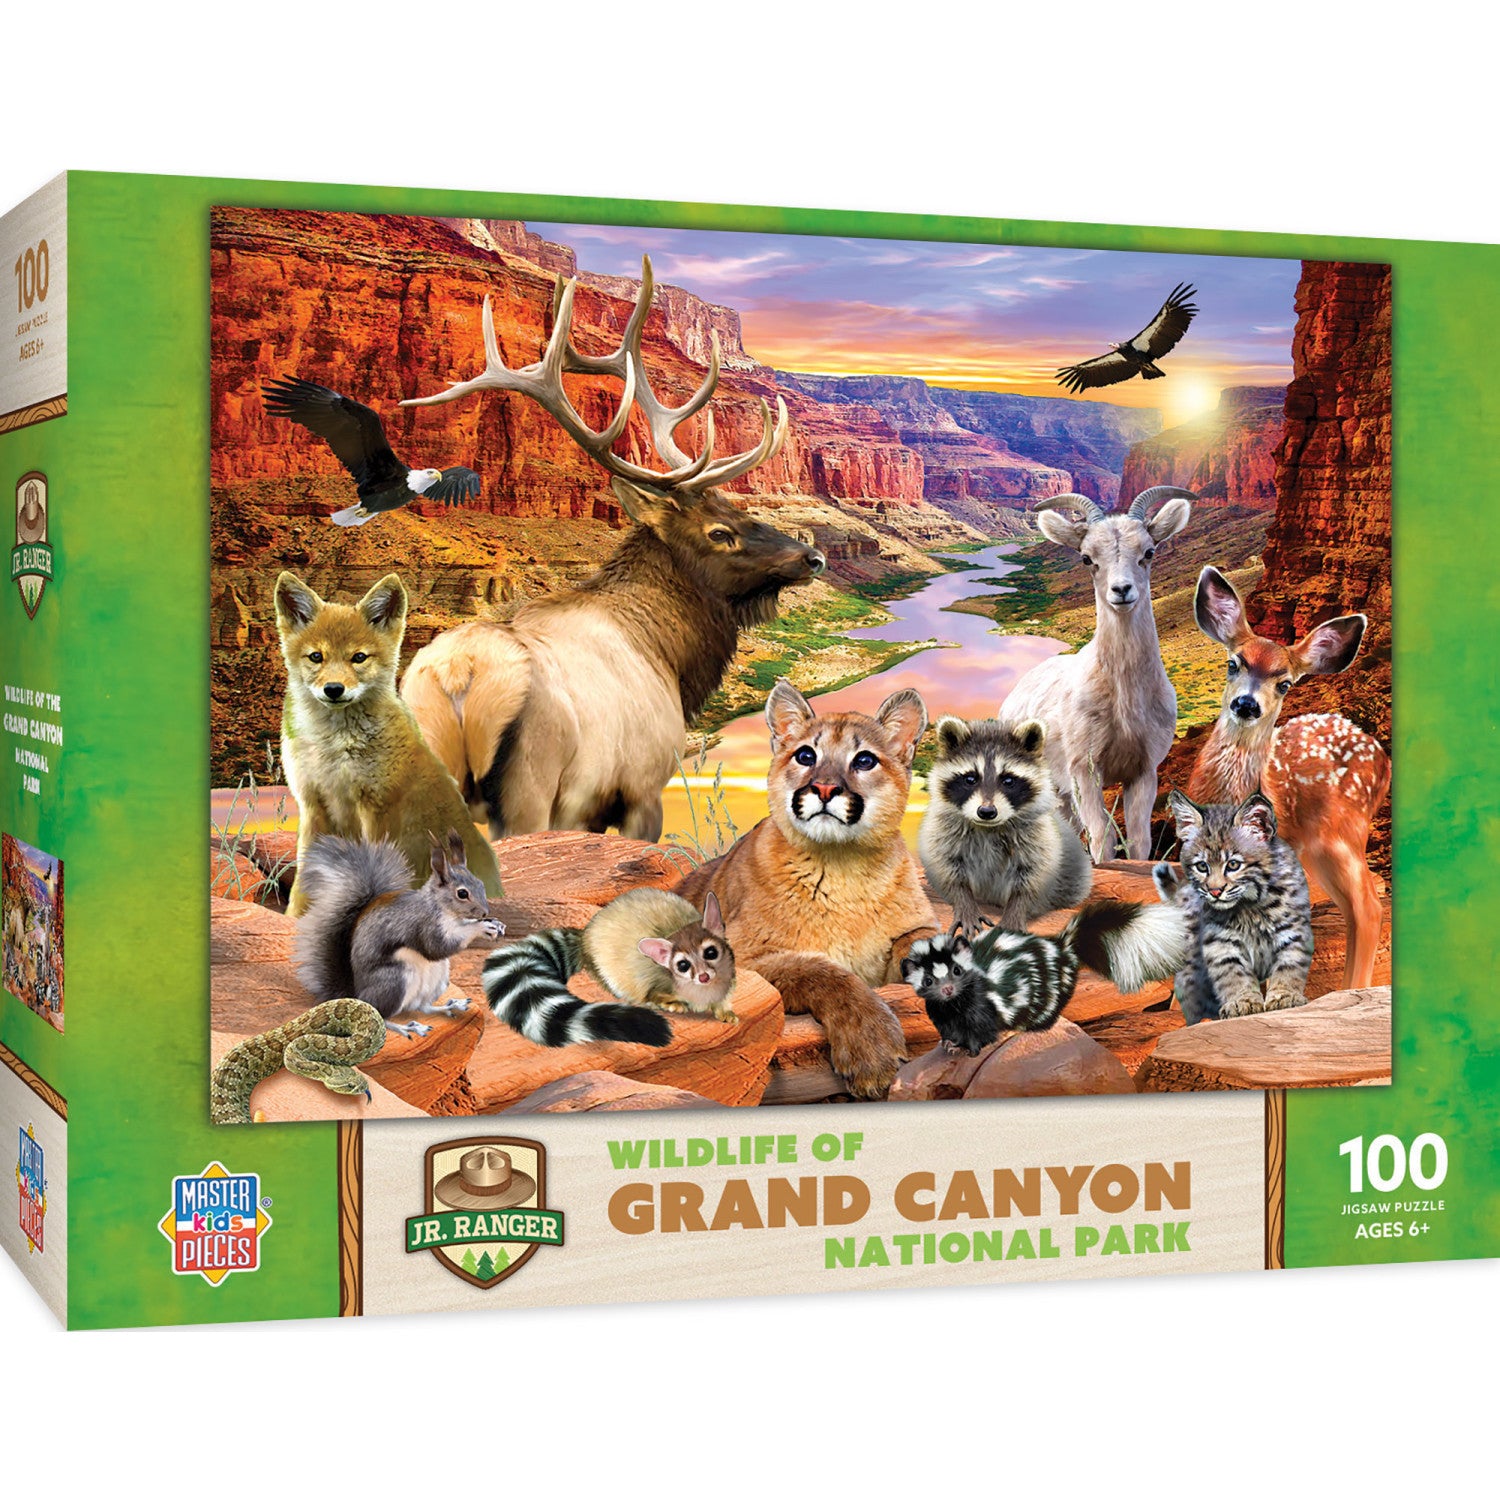 Wildlife of Grand Canyon National Park - 100 Piece Puzzle